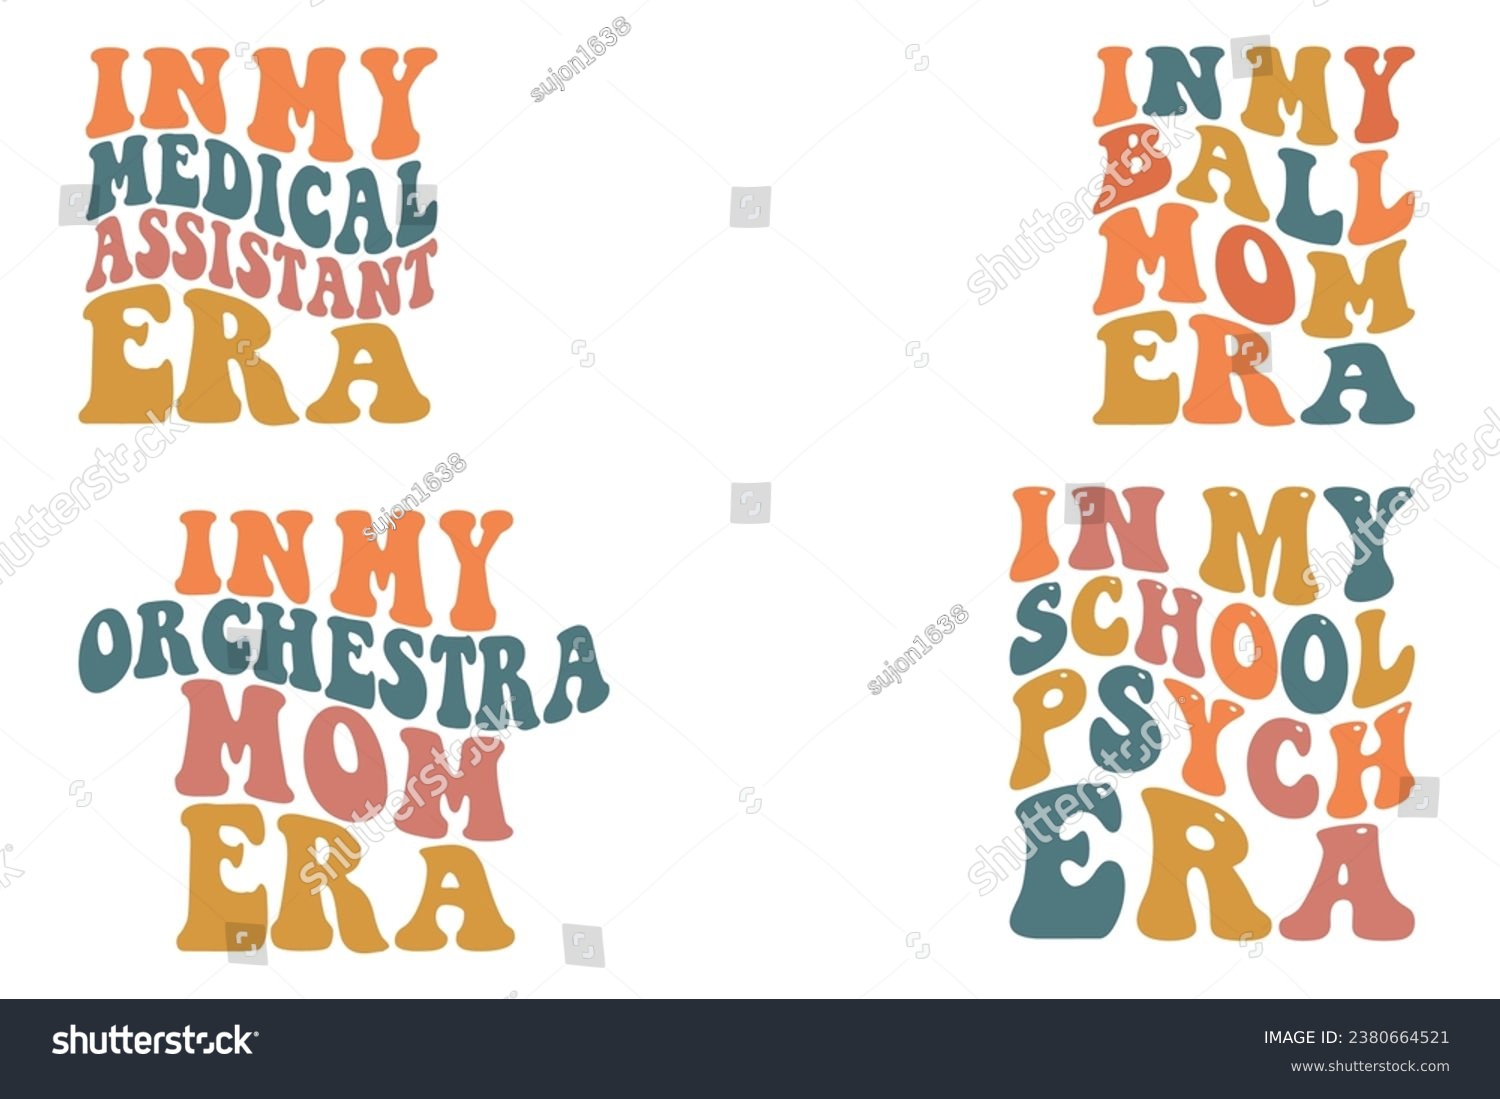 SVG of In My Medical Assistant Era, In My Ball Mom Era, In My Orchestra Mom Era, in My School Psych Era retro wavy t-shirt svg